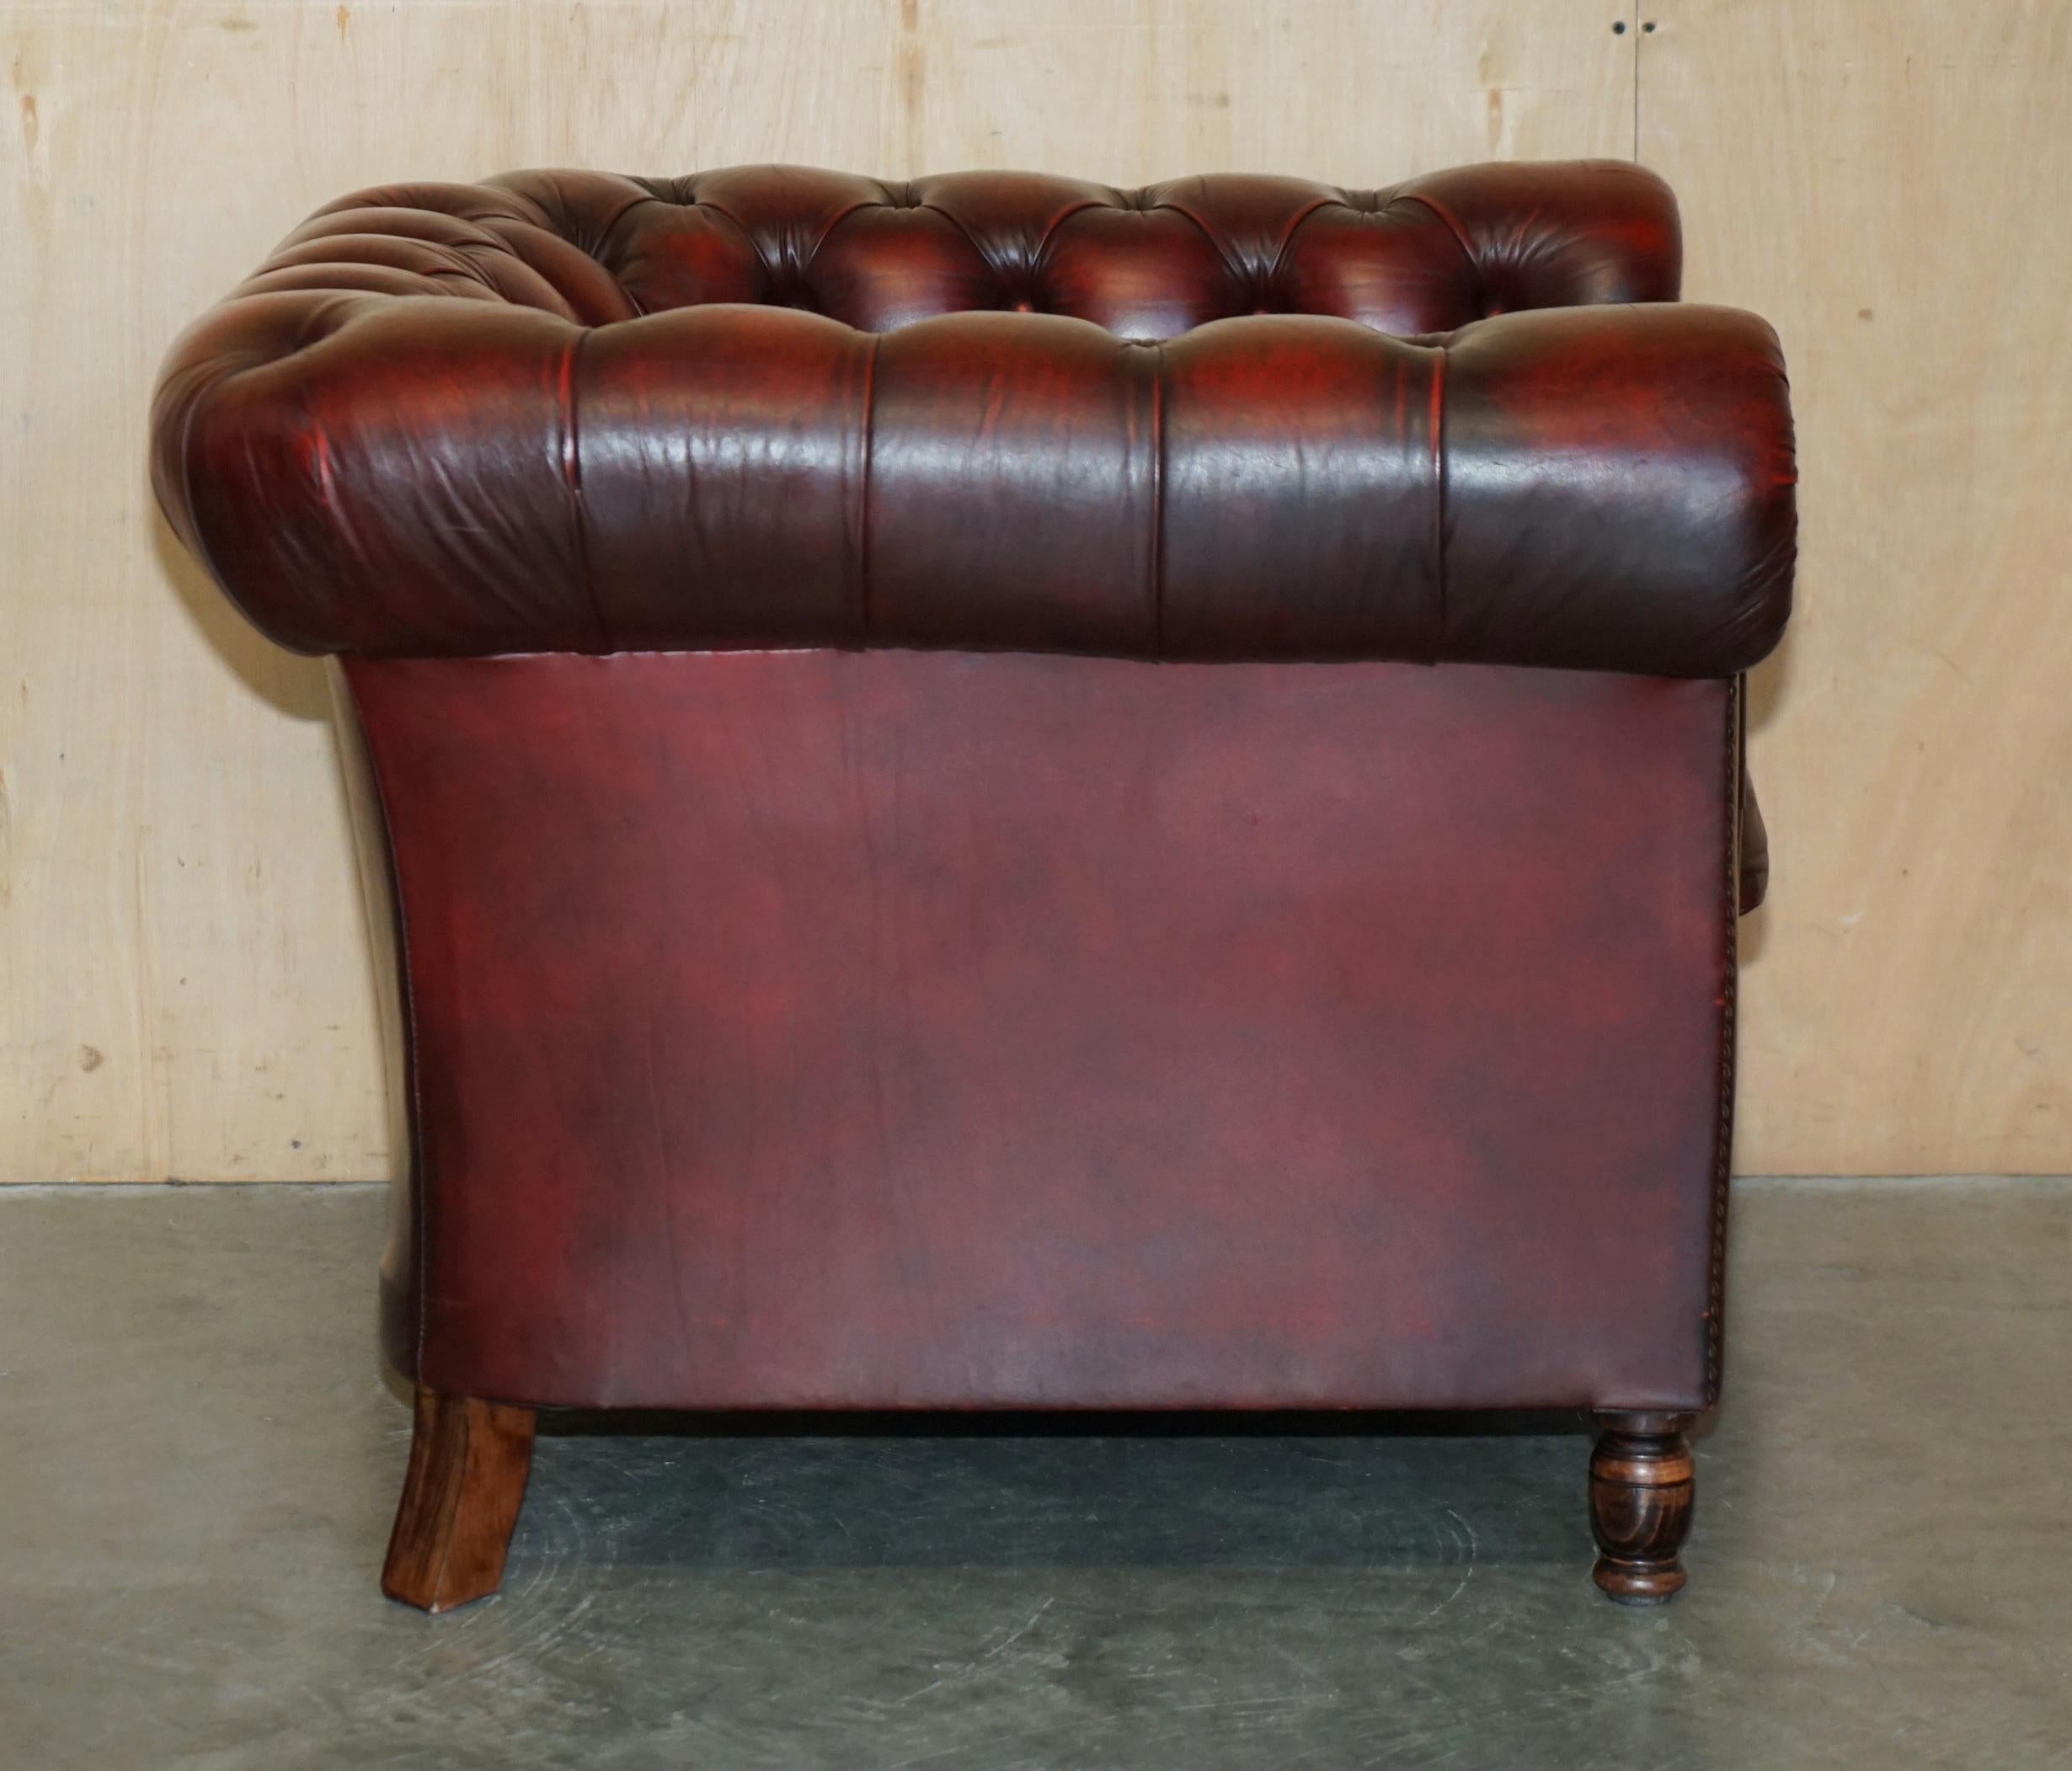 PAIR OF ViNTAGE OXBLOOD LEATHER CHESTERFIELD CLUB ARMCHAIRS WITH ELEGANT LEGS 4